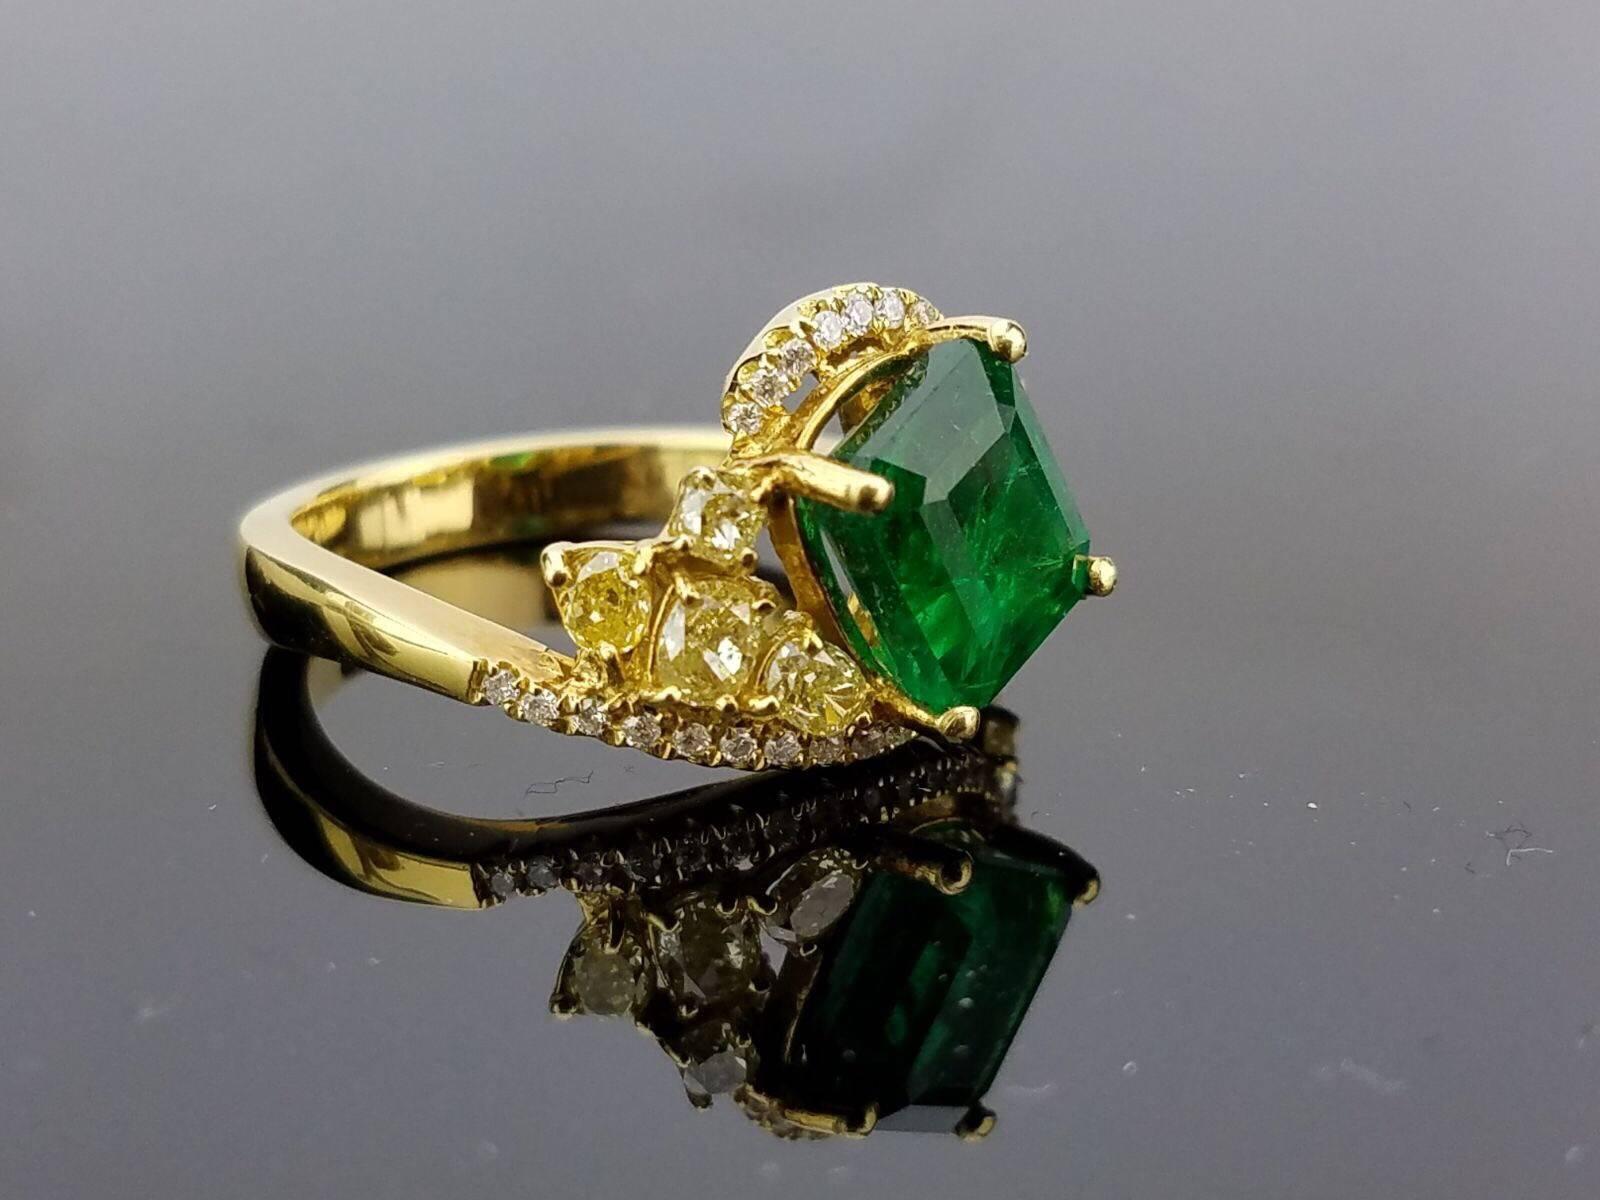 Unique combination of yellow and white Diamonds, and Zambian Emerald set in 18K yellow Gold.

Stone Details: 
Stone: Zambian Emerald
Cut: Emerald cut
Carat weight: 2.03 carat

Diamond Details:
Cut: Brilliant (round) / Oval
Total Carat Weight: 0.92